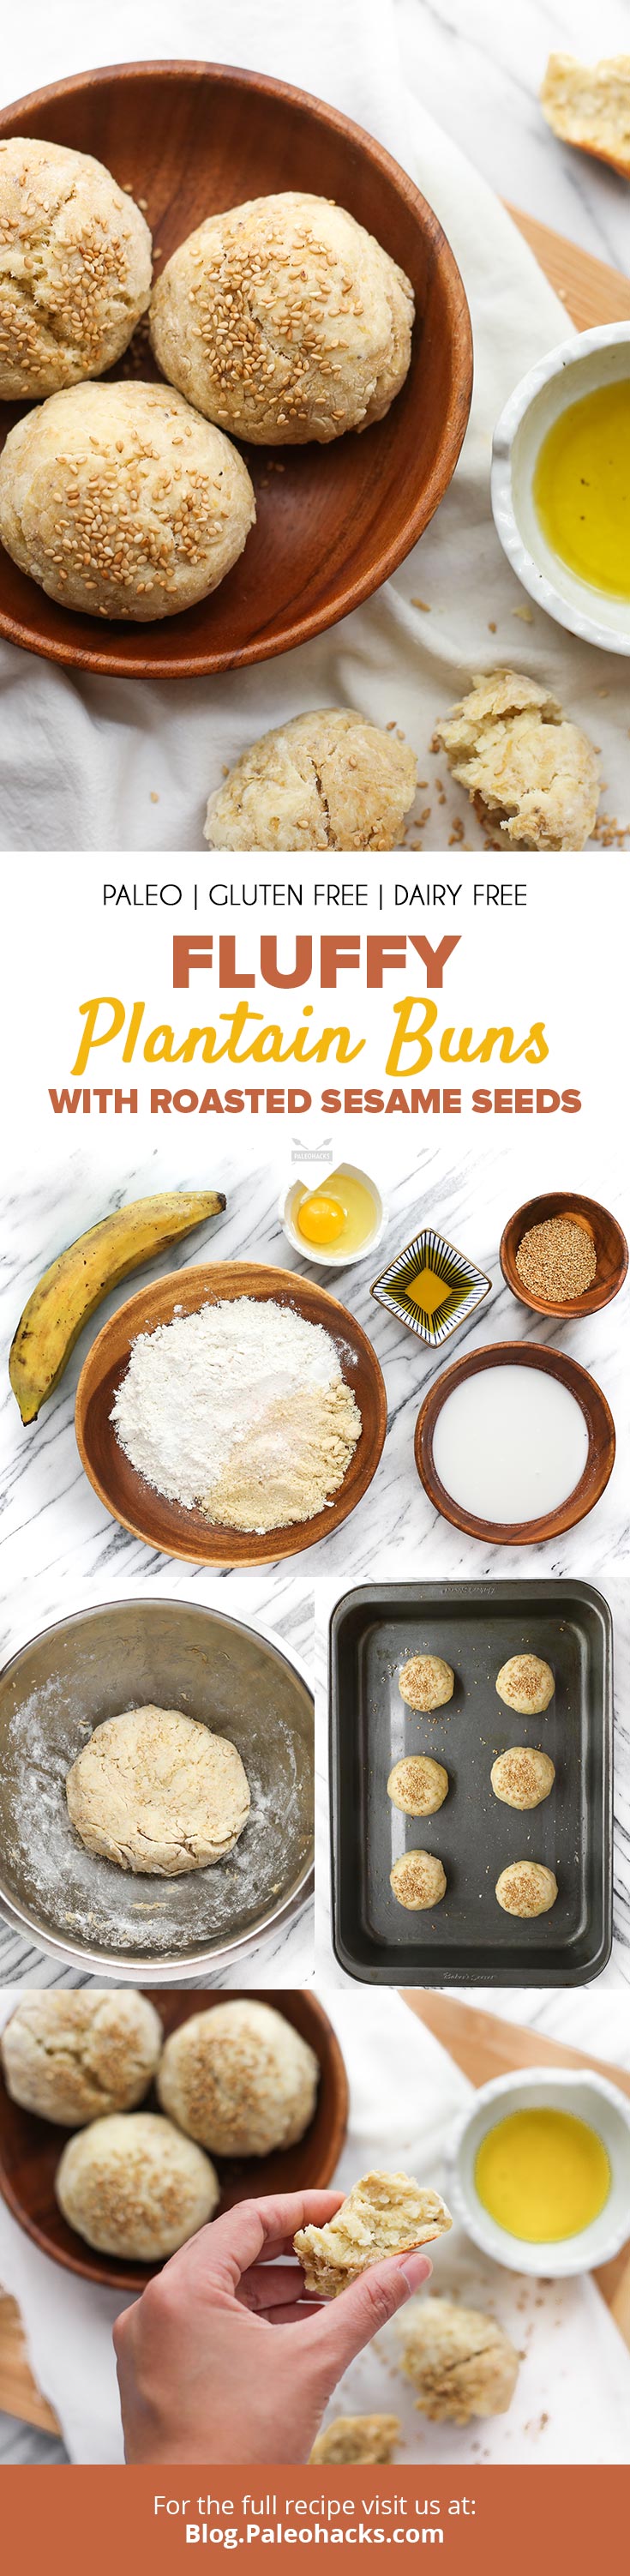 Love a good dinner roll, but are sick of rock-hard breads with no flavor? Bake up grain-free Paleo Plantain Buns with roasted sesame seeds in just 30 minutes!